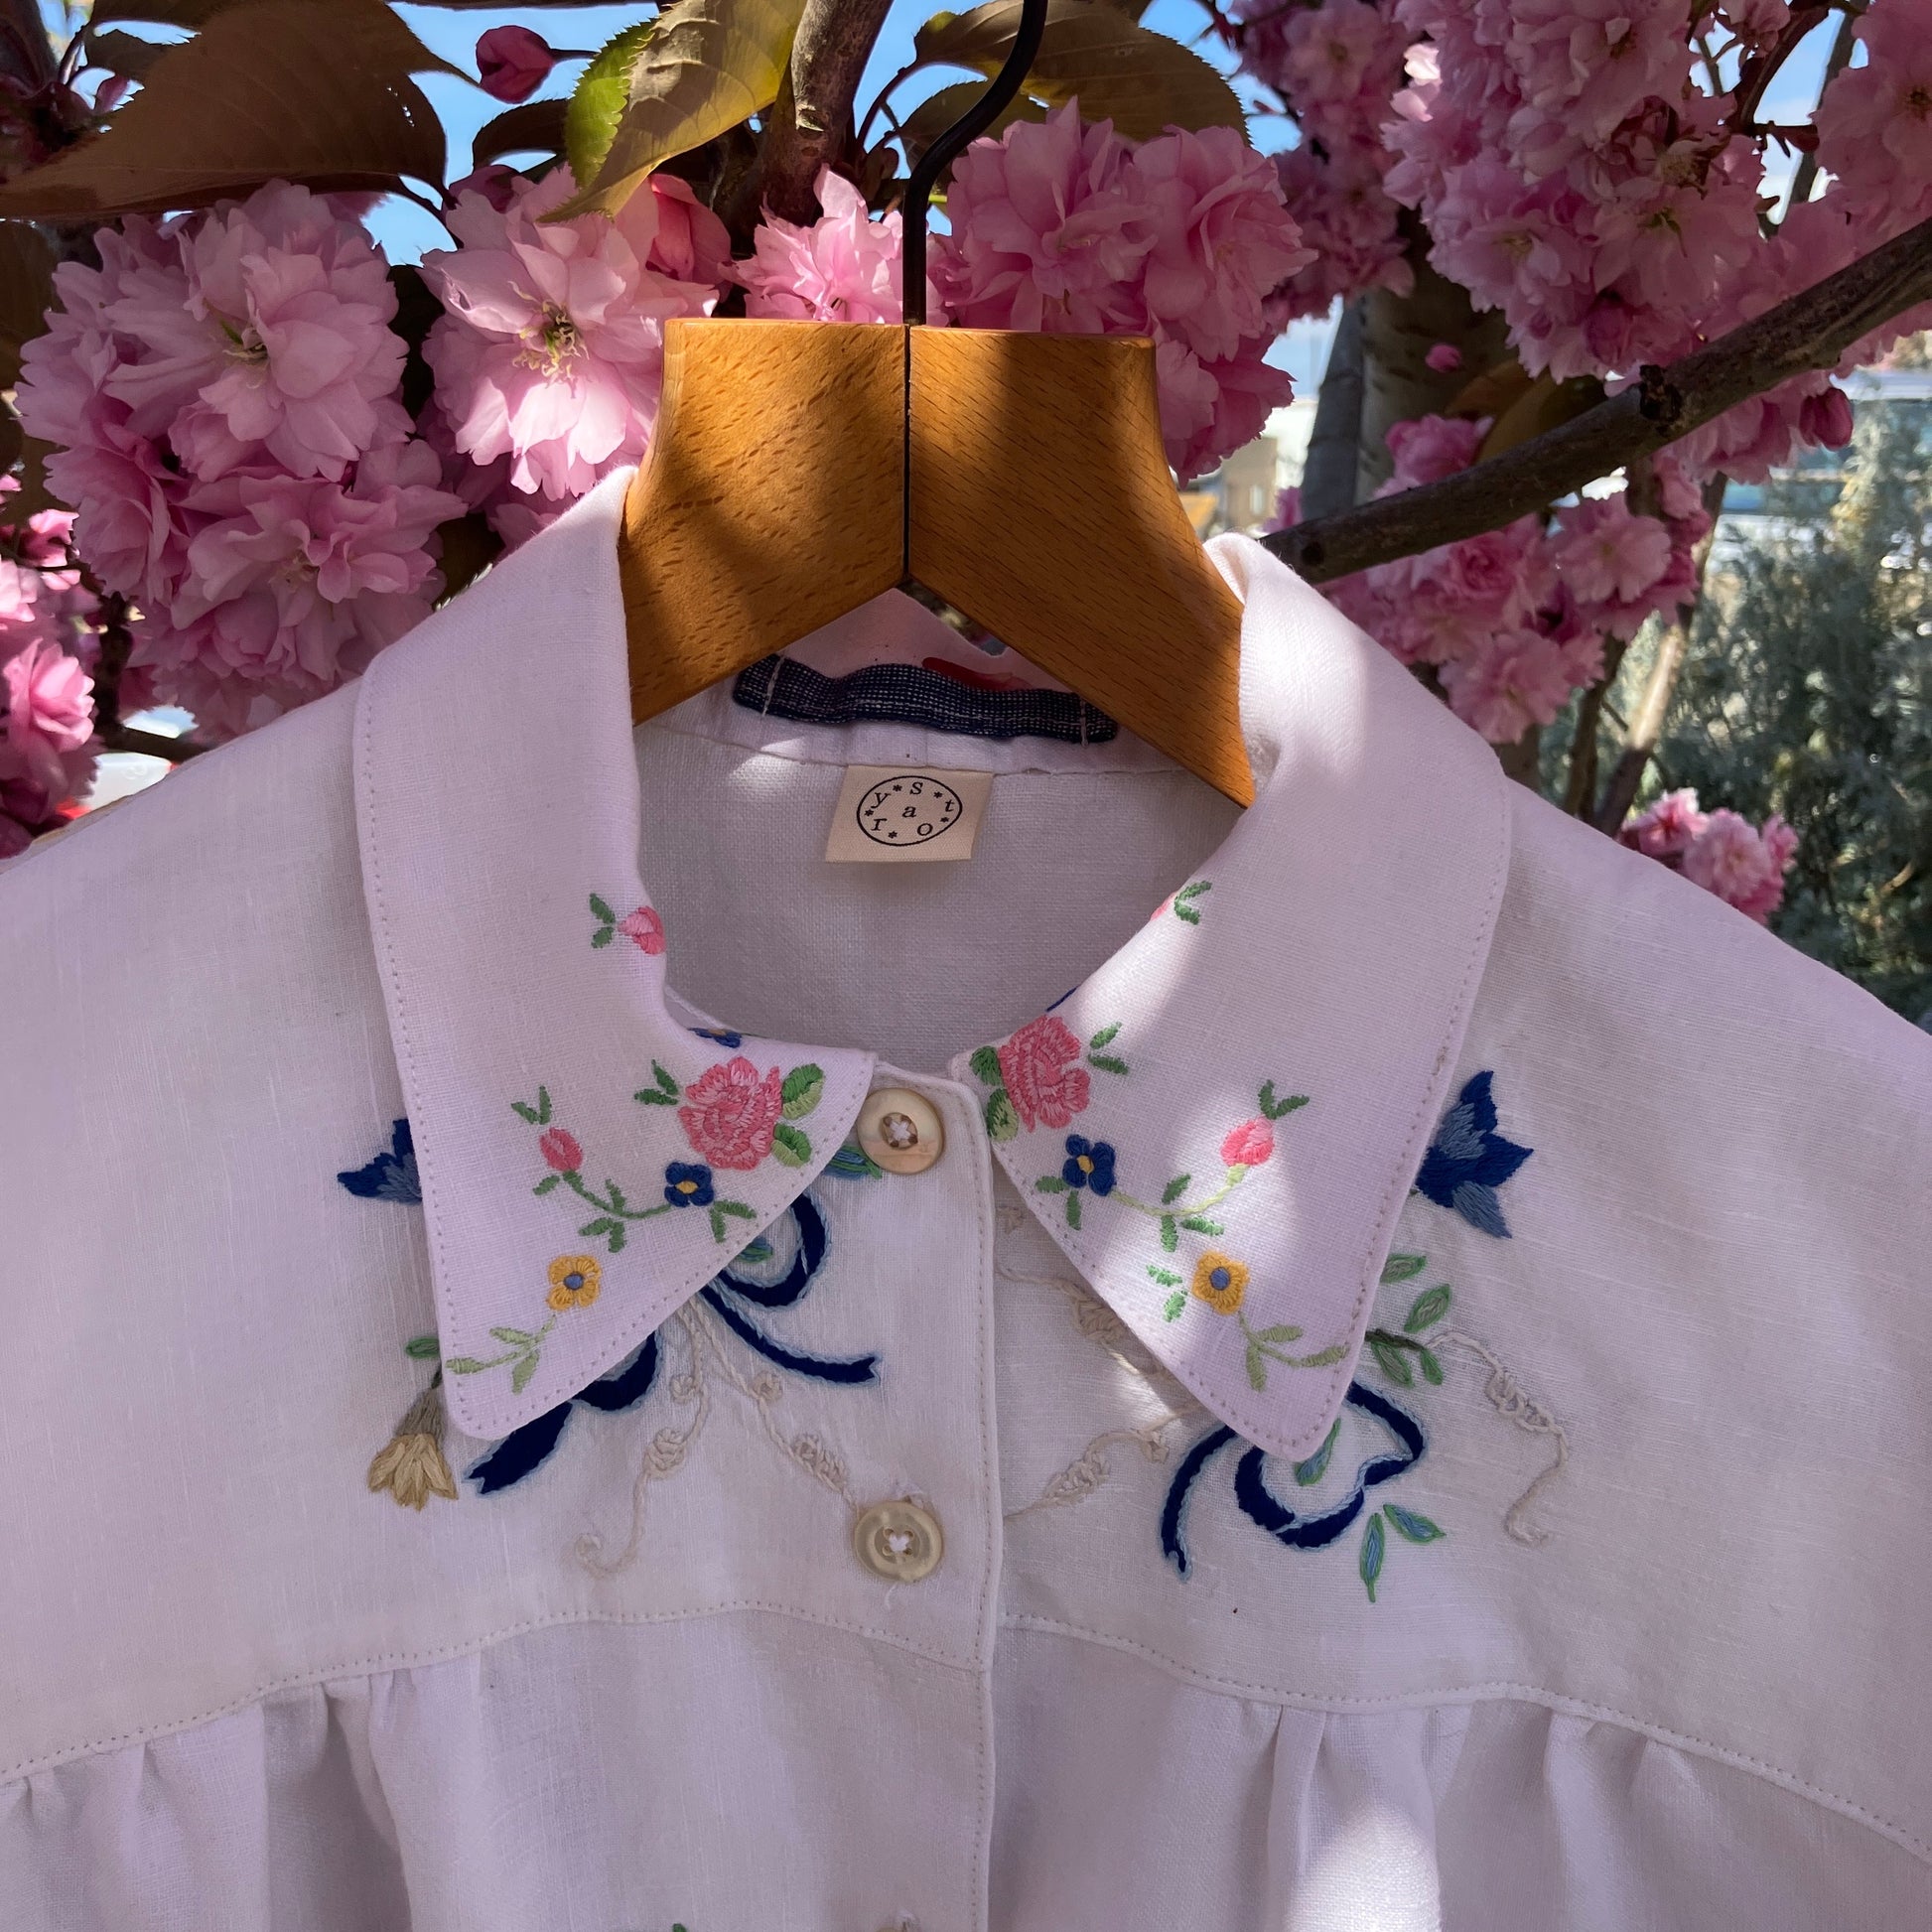 Short sleeved shirt made from a patchwork of reclaimed tablecloths with a traditional English pub with a thatched roof embroidered on the front and two bows on the yoke, close-up, hanging in a pink blossom tree